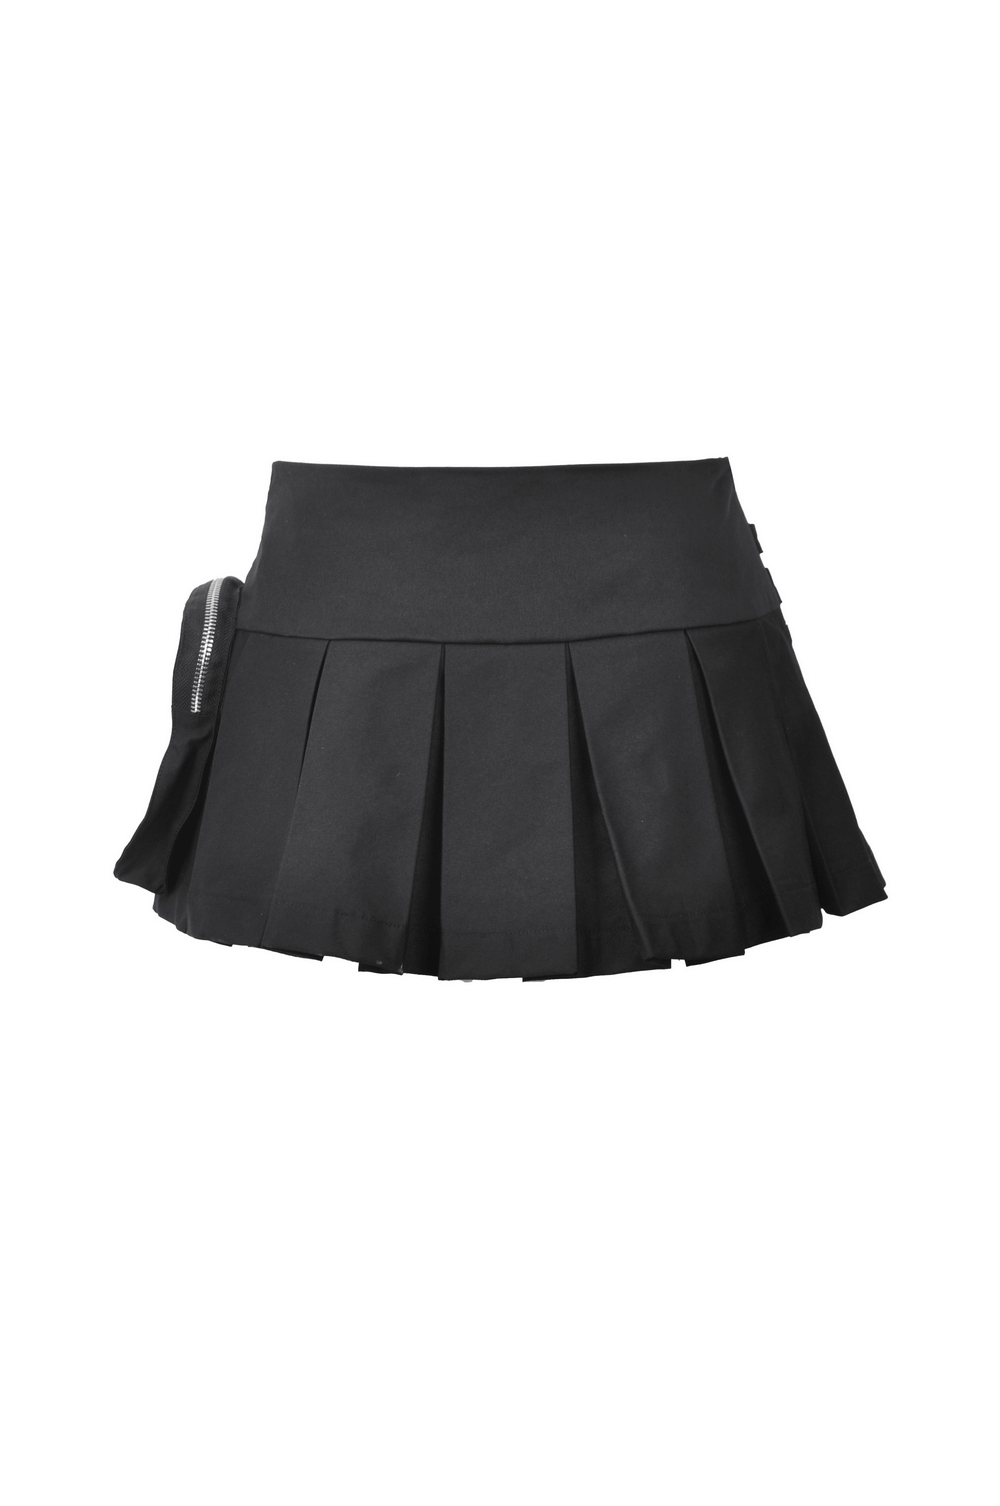 Edgy Black Pleated Skirt with Buckle Detail and Zip